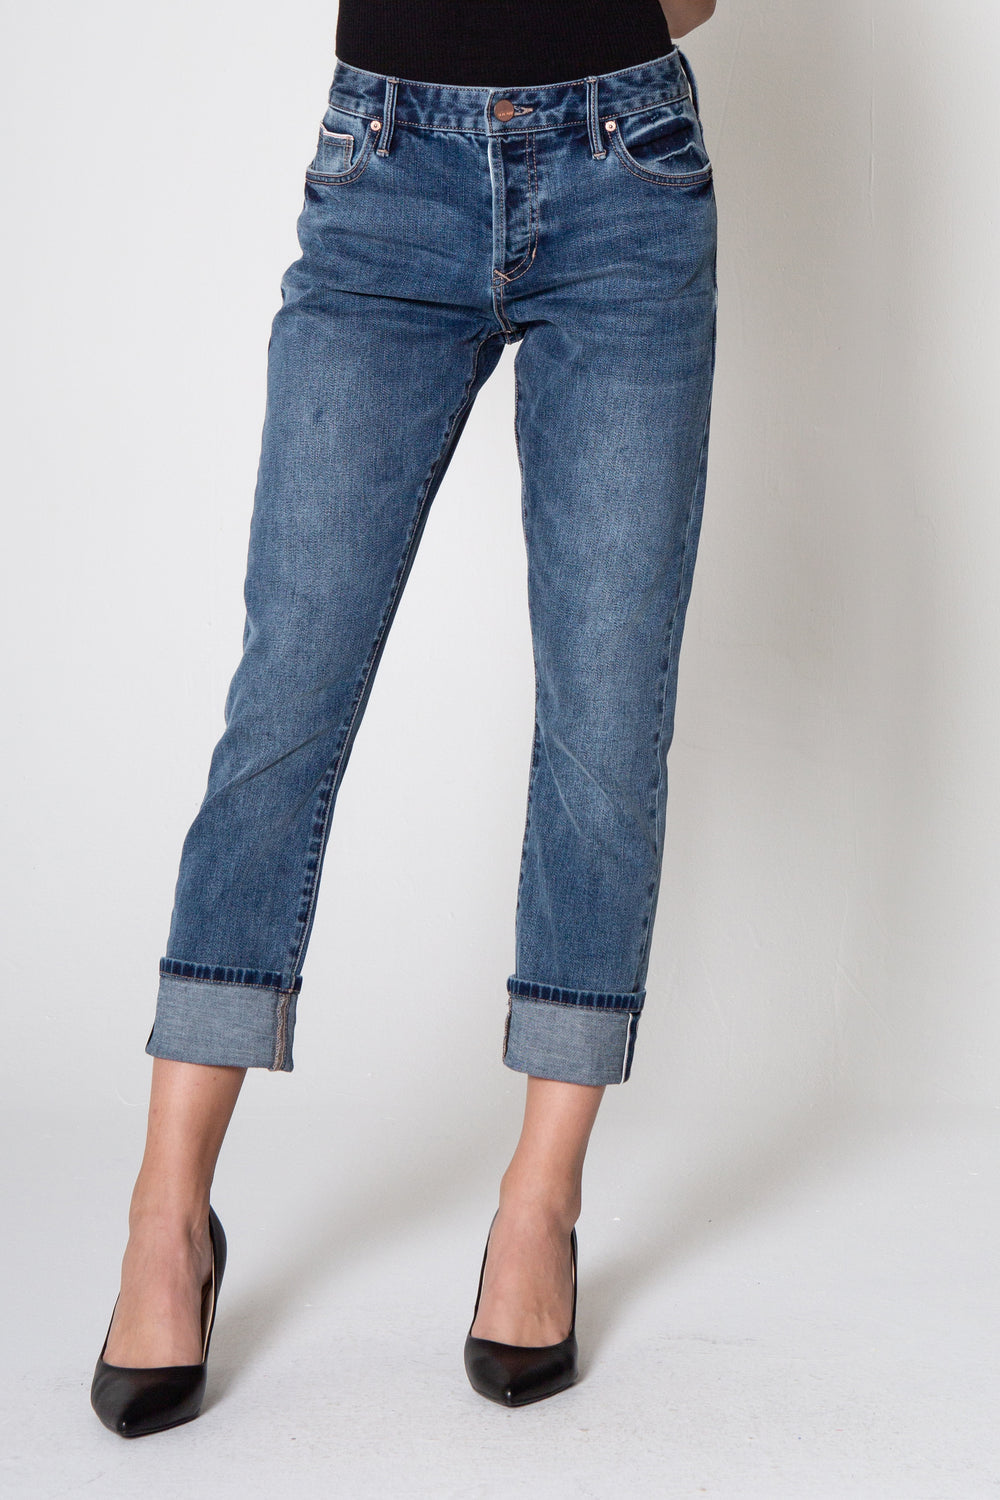 image of a female model wearing a 9 1/2" BLAIRE HIGH RISE SLIM STRAIGHT IN COTTON JEANS